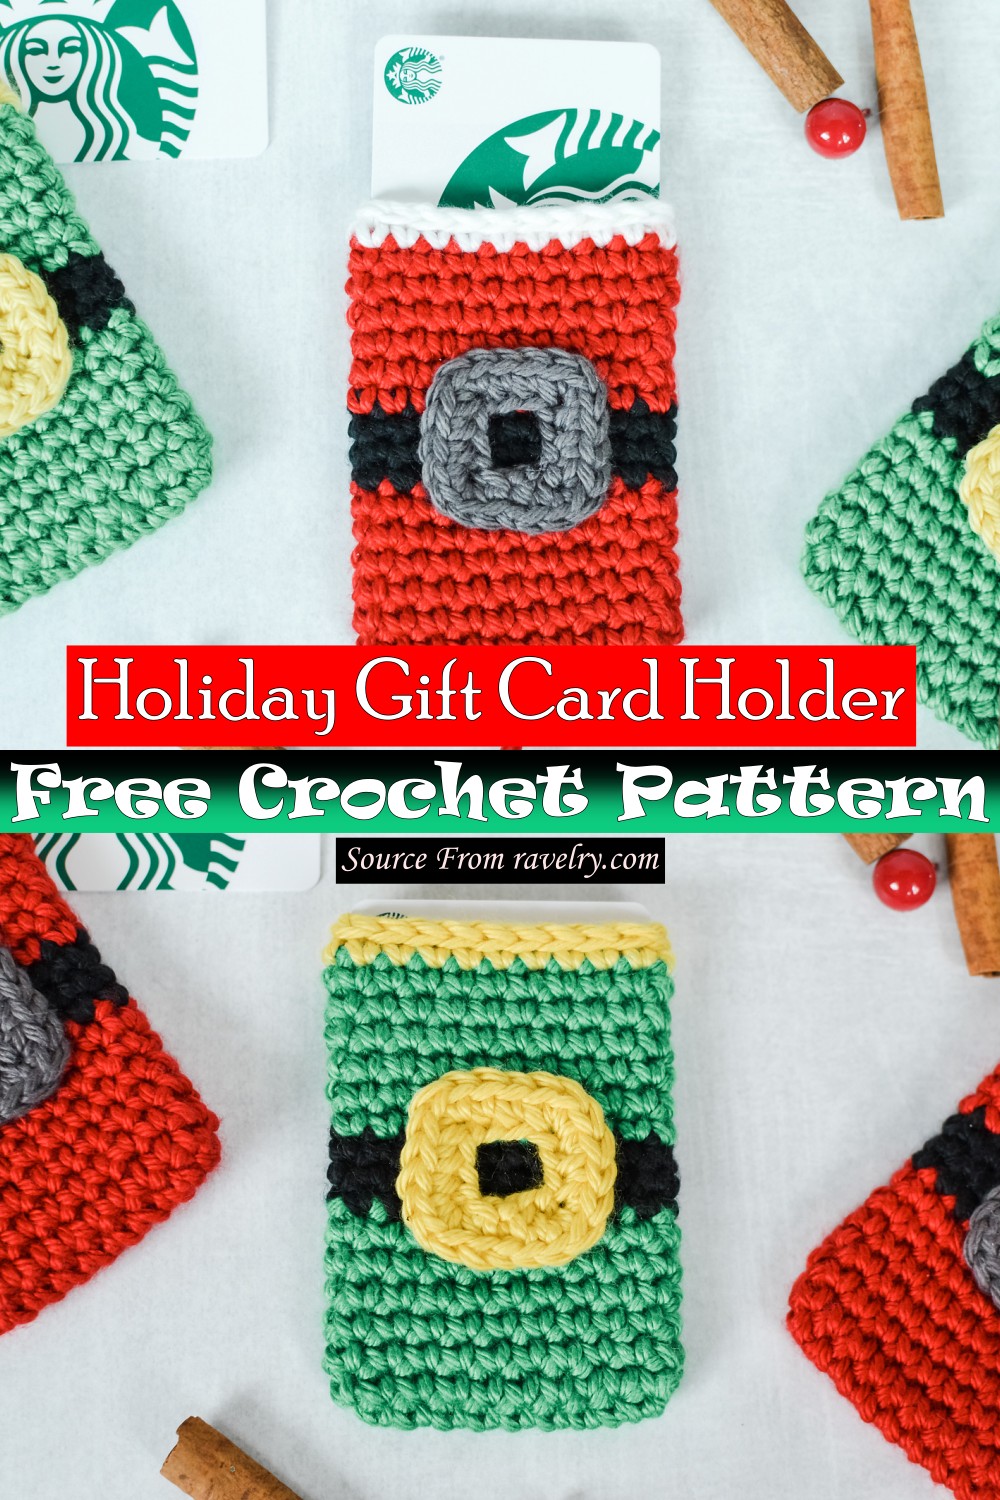 Free Crochet Holiday Gift Card Holder Pattern